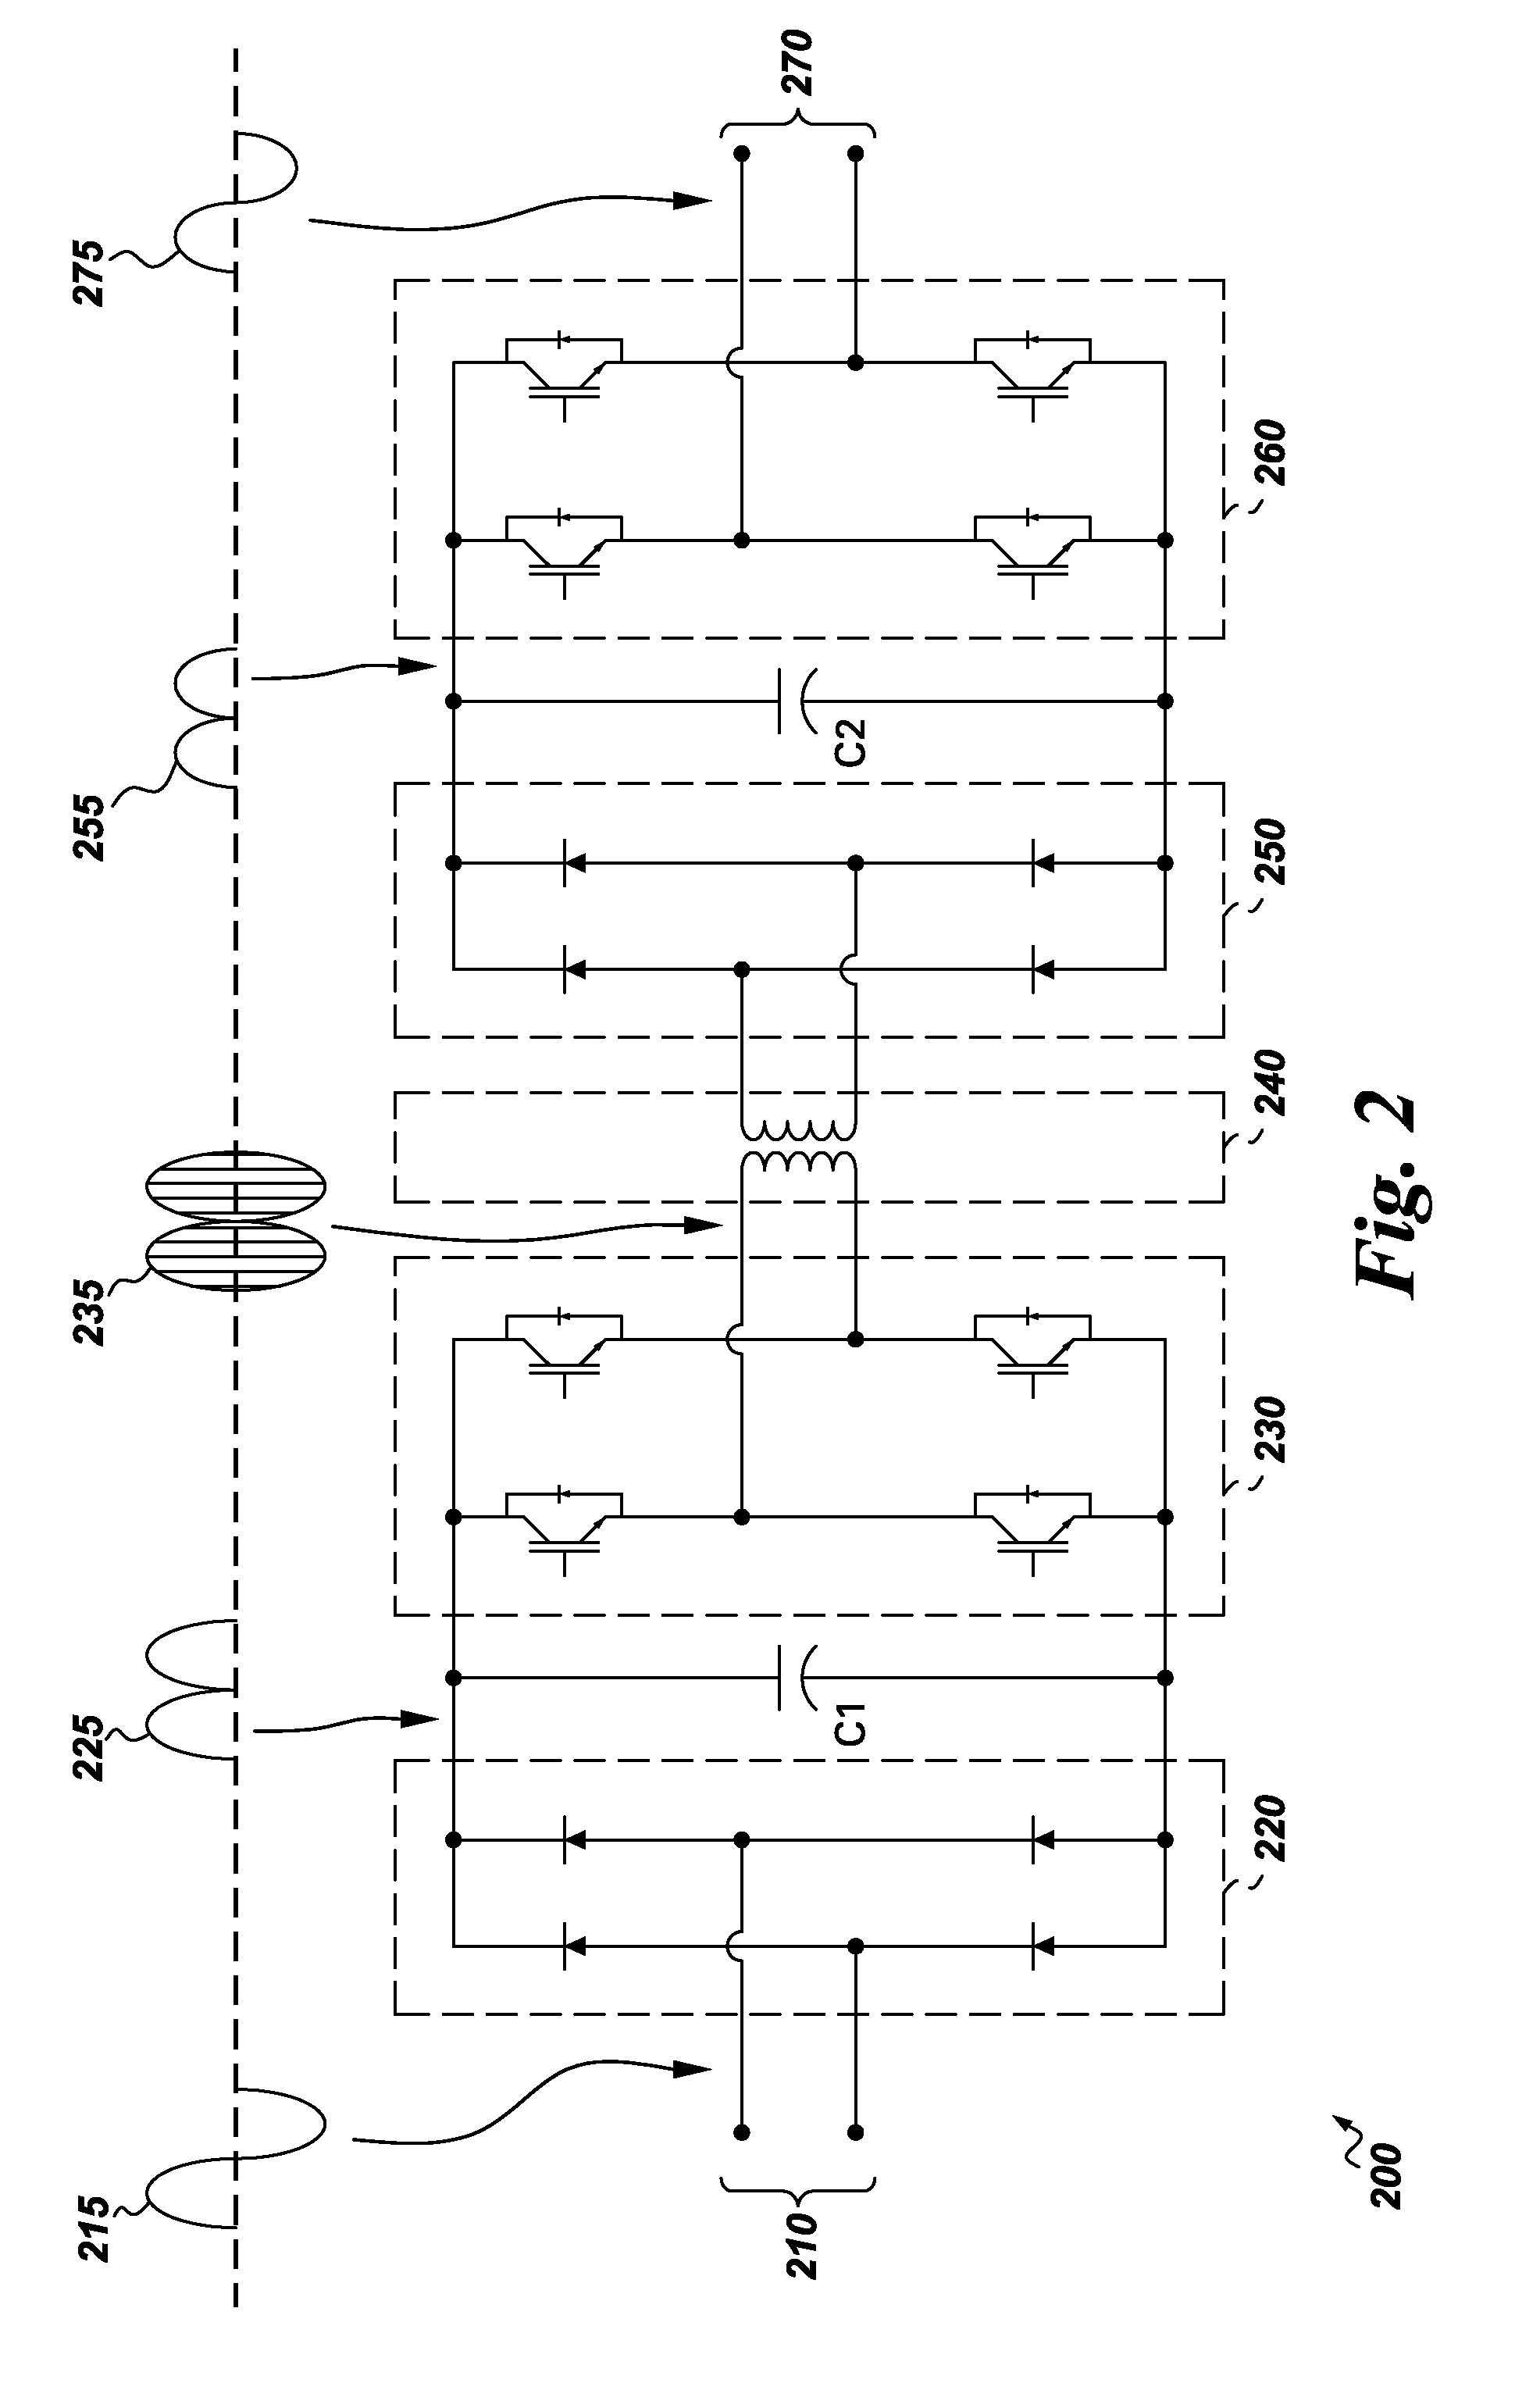 AC-AC converter with high frequency link